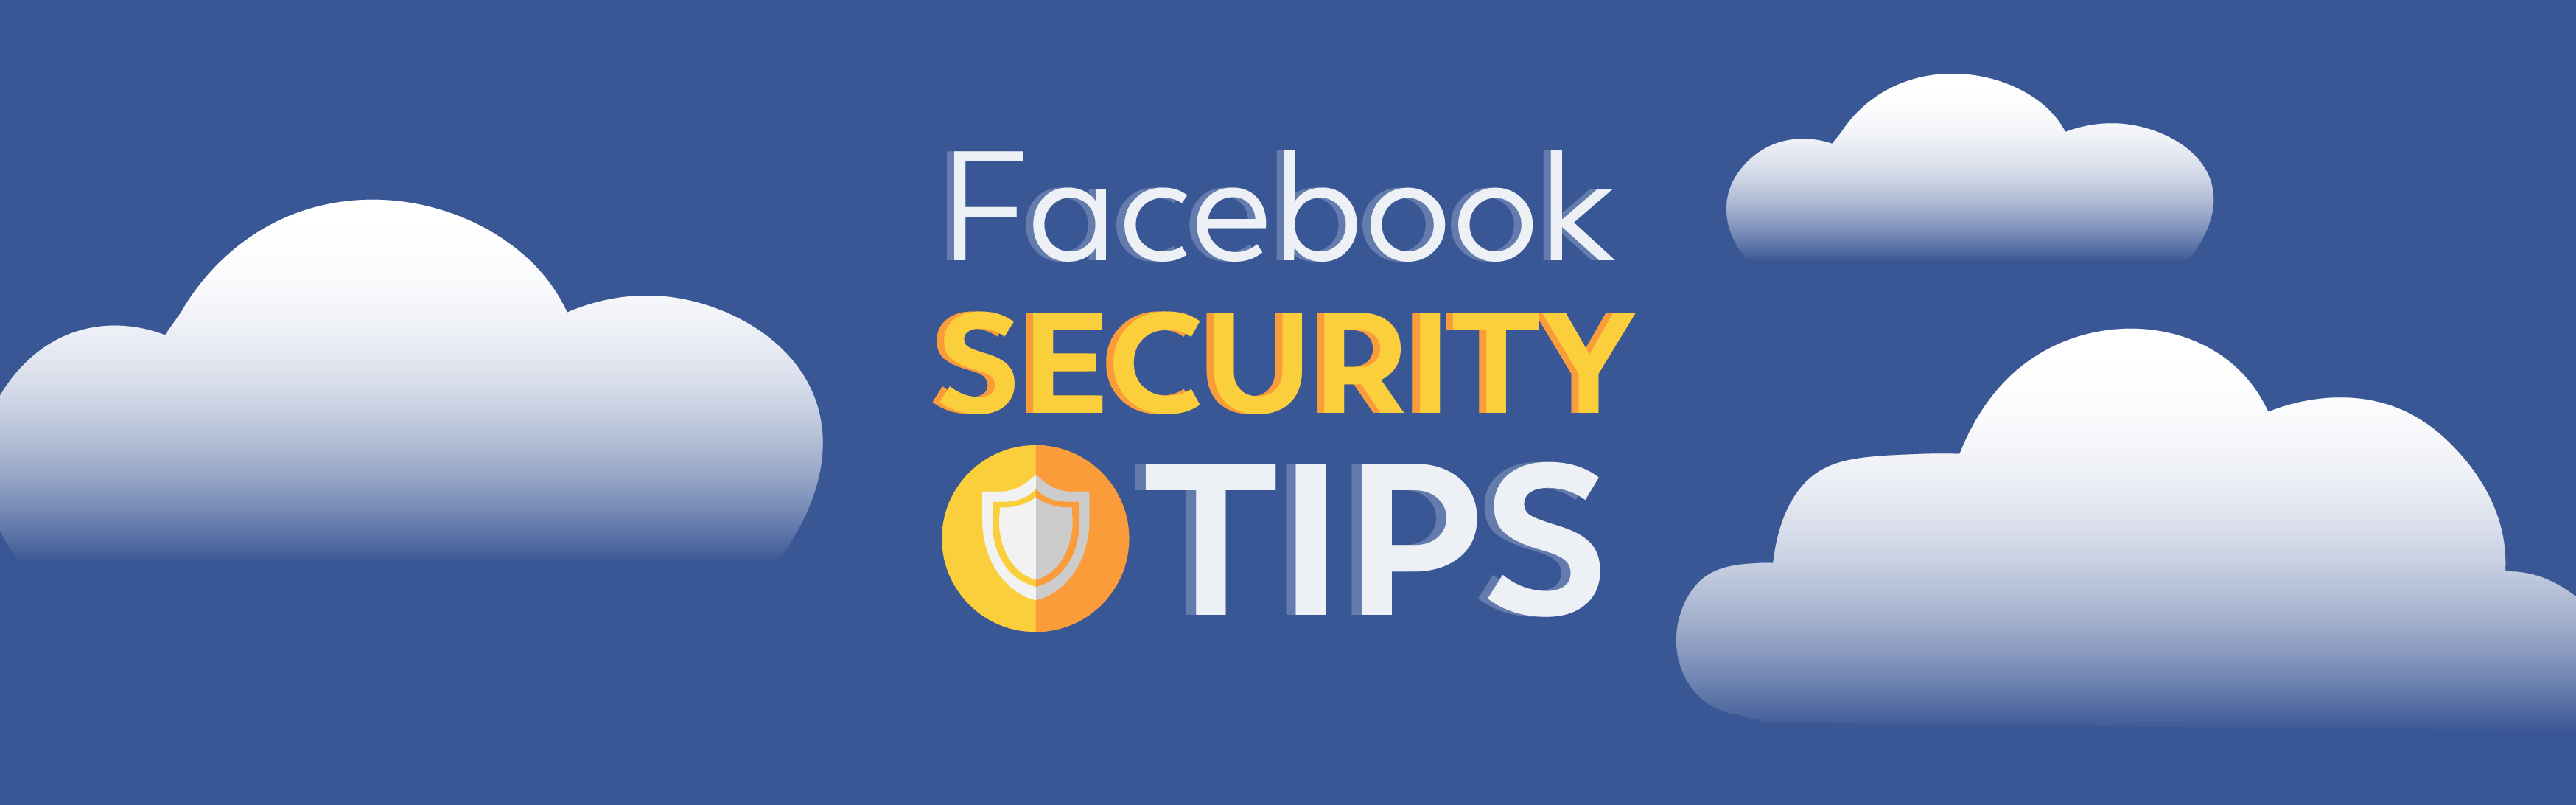 Facebook Page Security Tips 6 Ways To Stay Protected